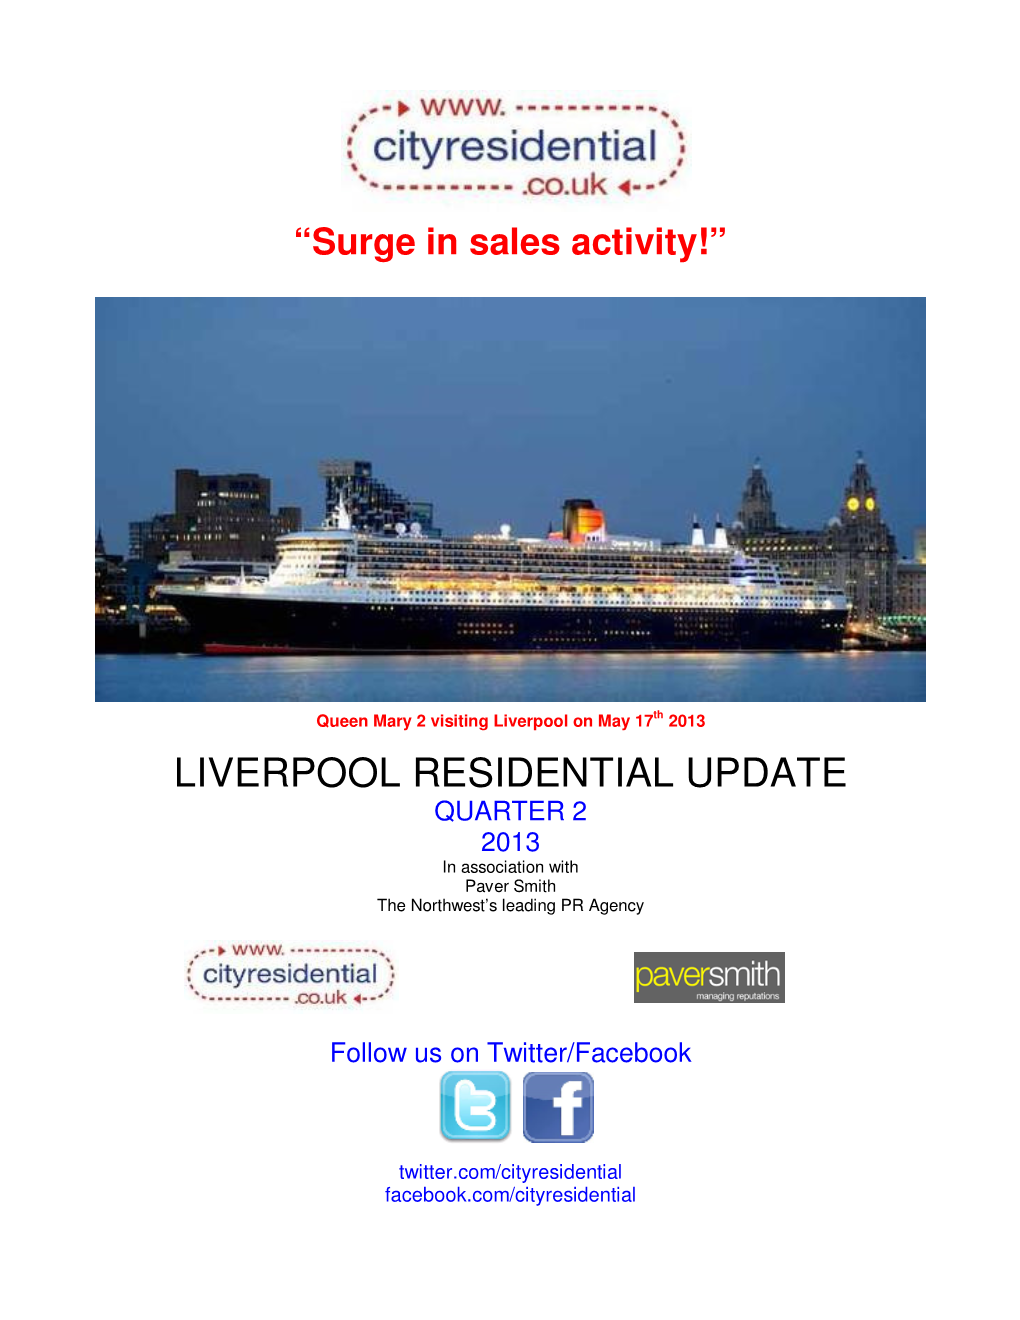 LIVERPOOL RESIDENTIAL UPDATE QUARTER 2 2013 in Association with Paver Smith the Northwest’S Leading PR Agency